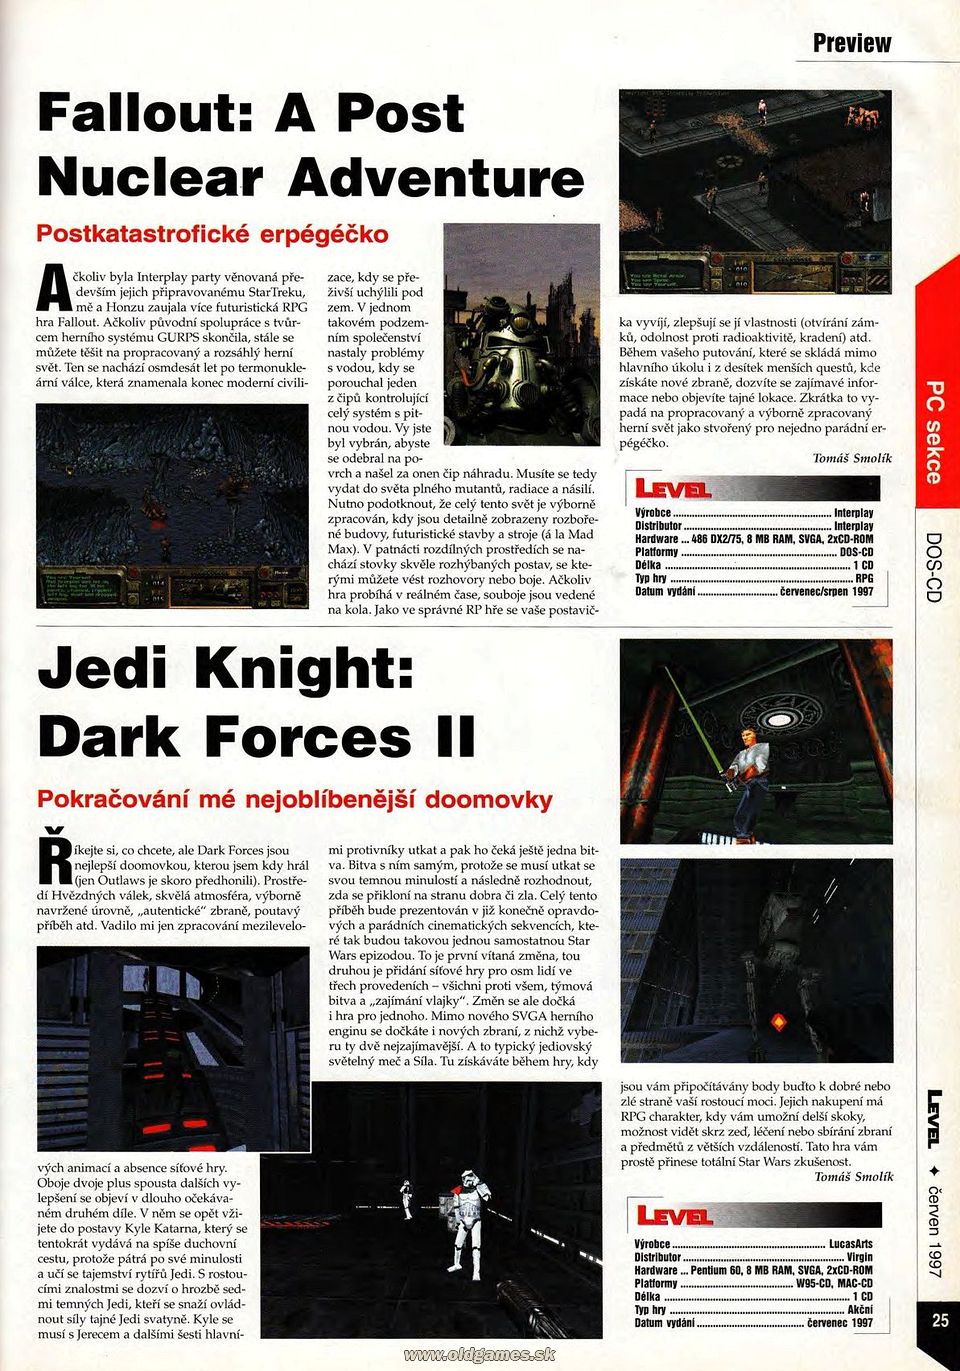 Preview: Fallout: A Post Nuclear Adventure, Jedi Knight: Dark Forces II